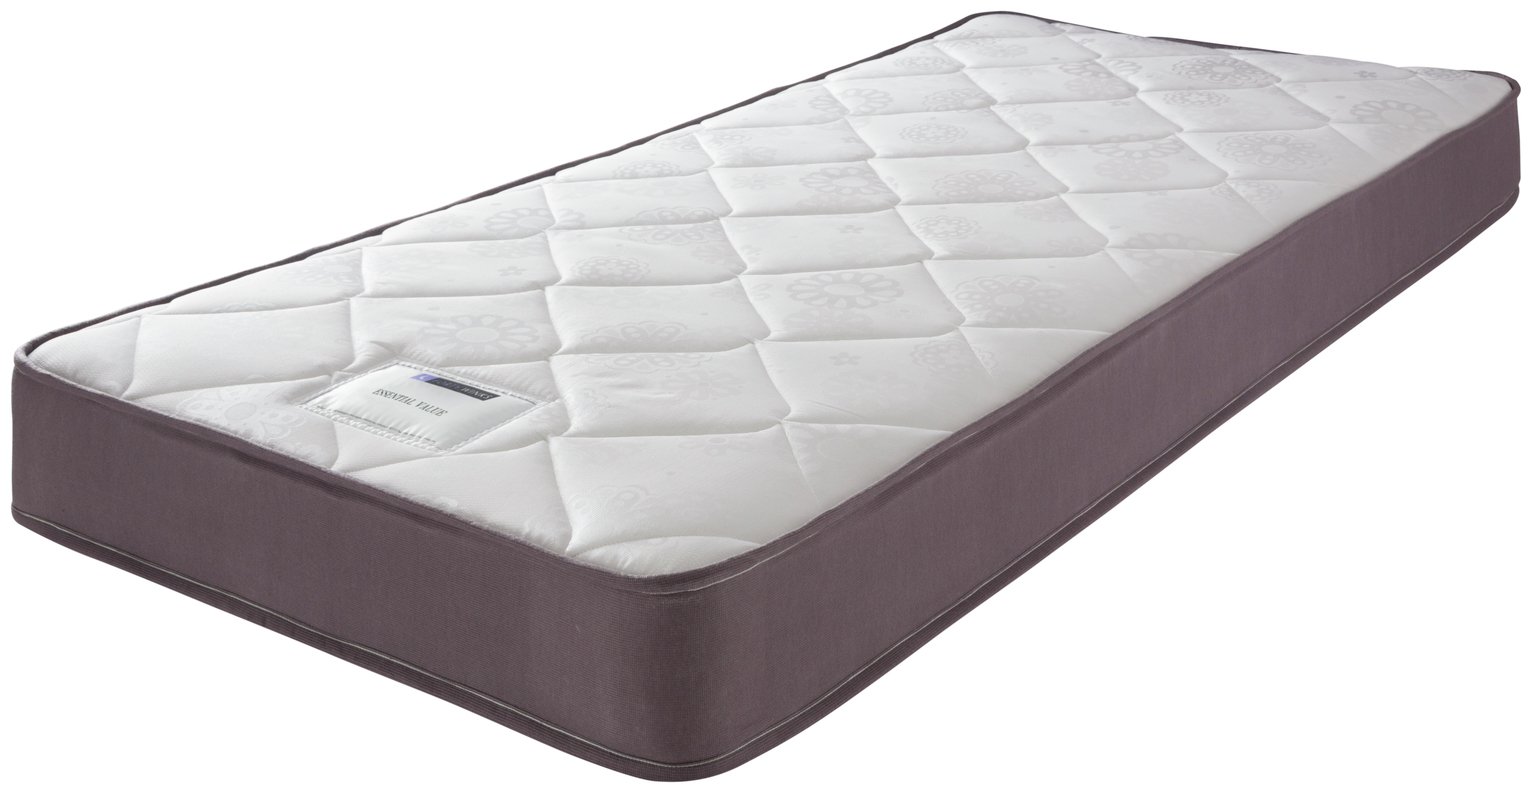 forty winks mattress review